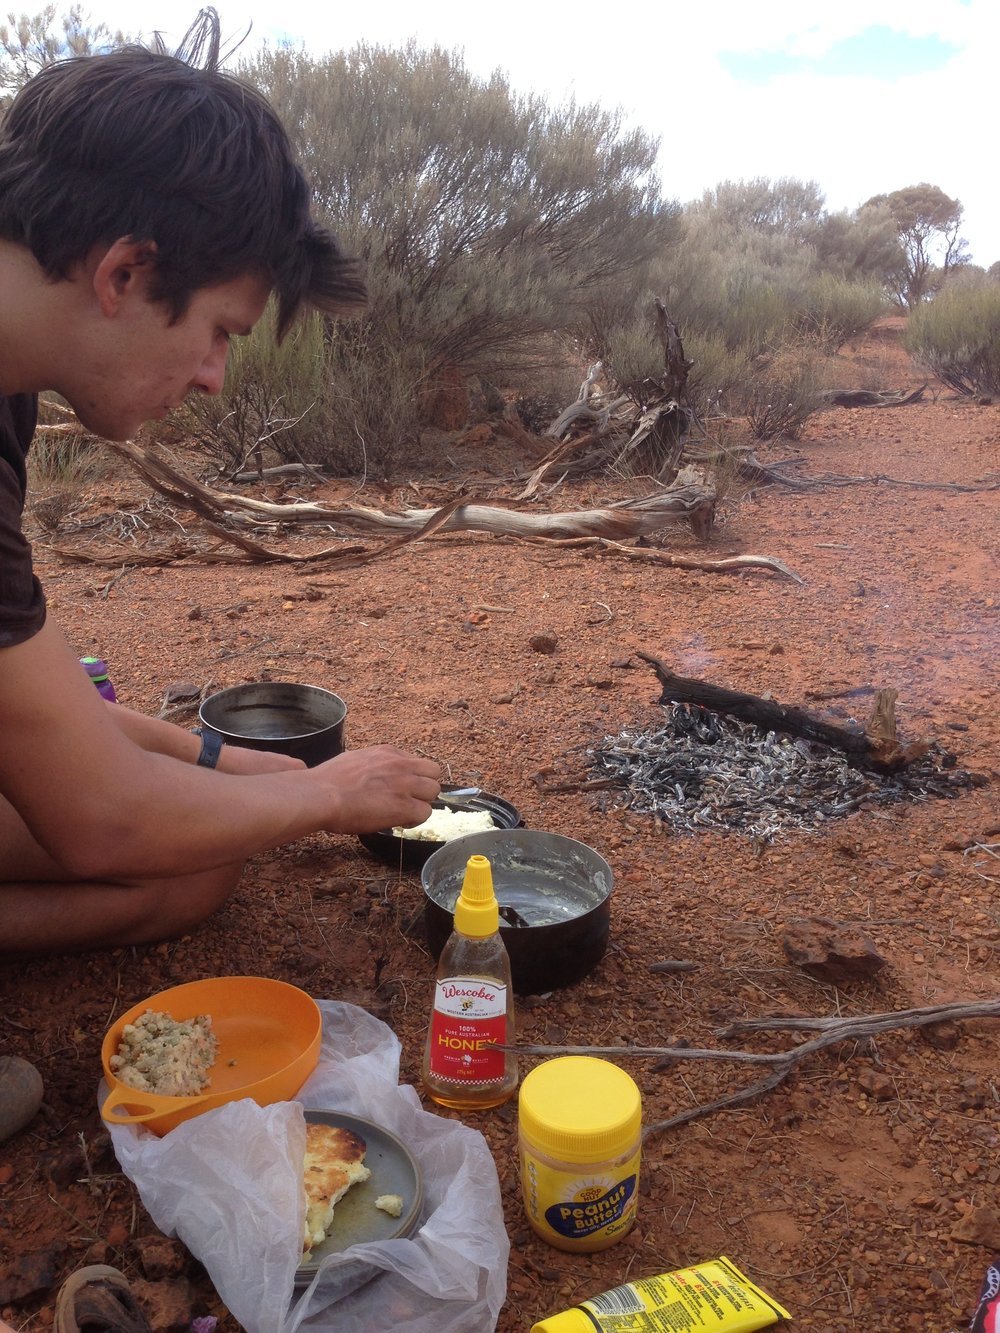 Out of food = make fire, damper lunch